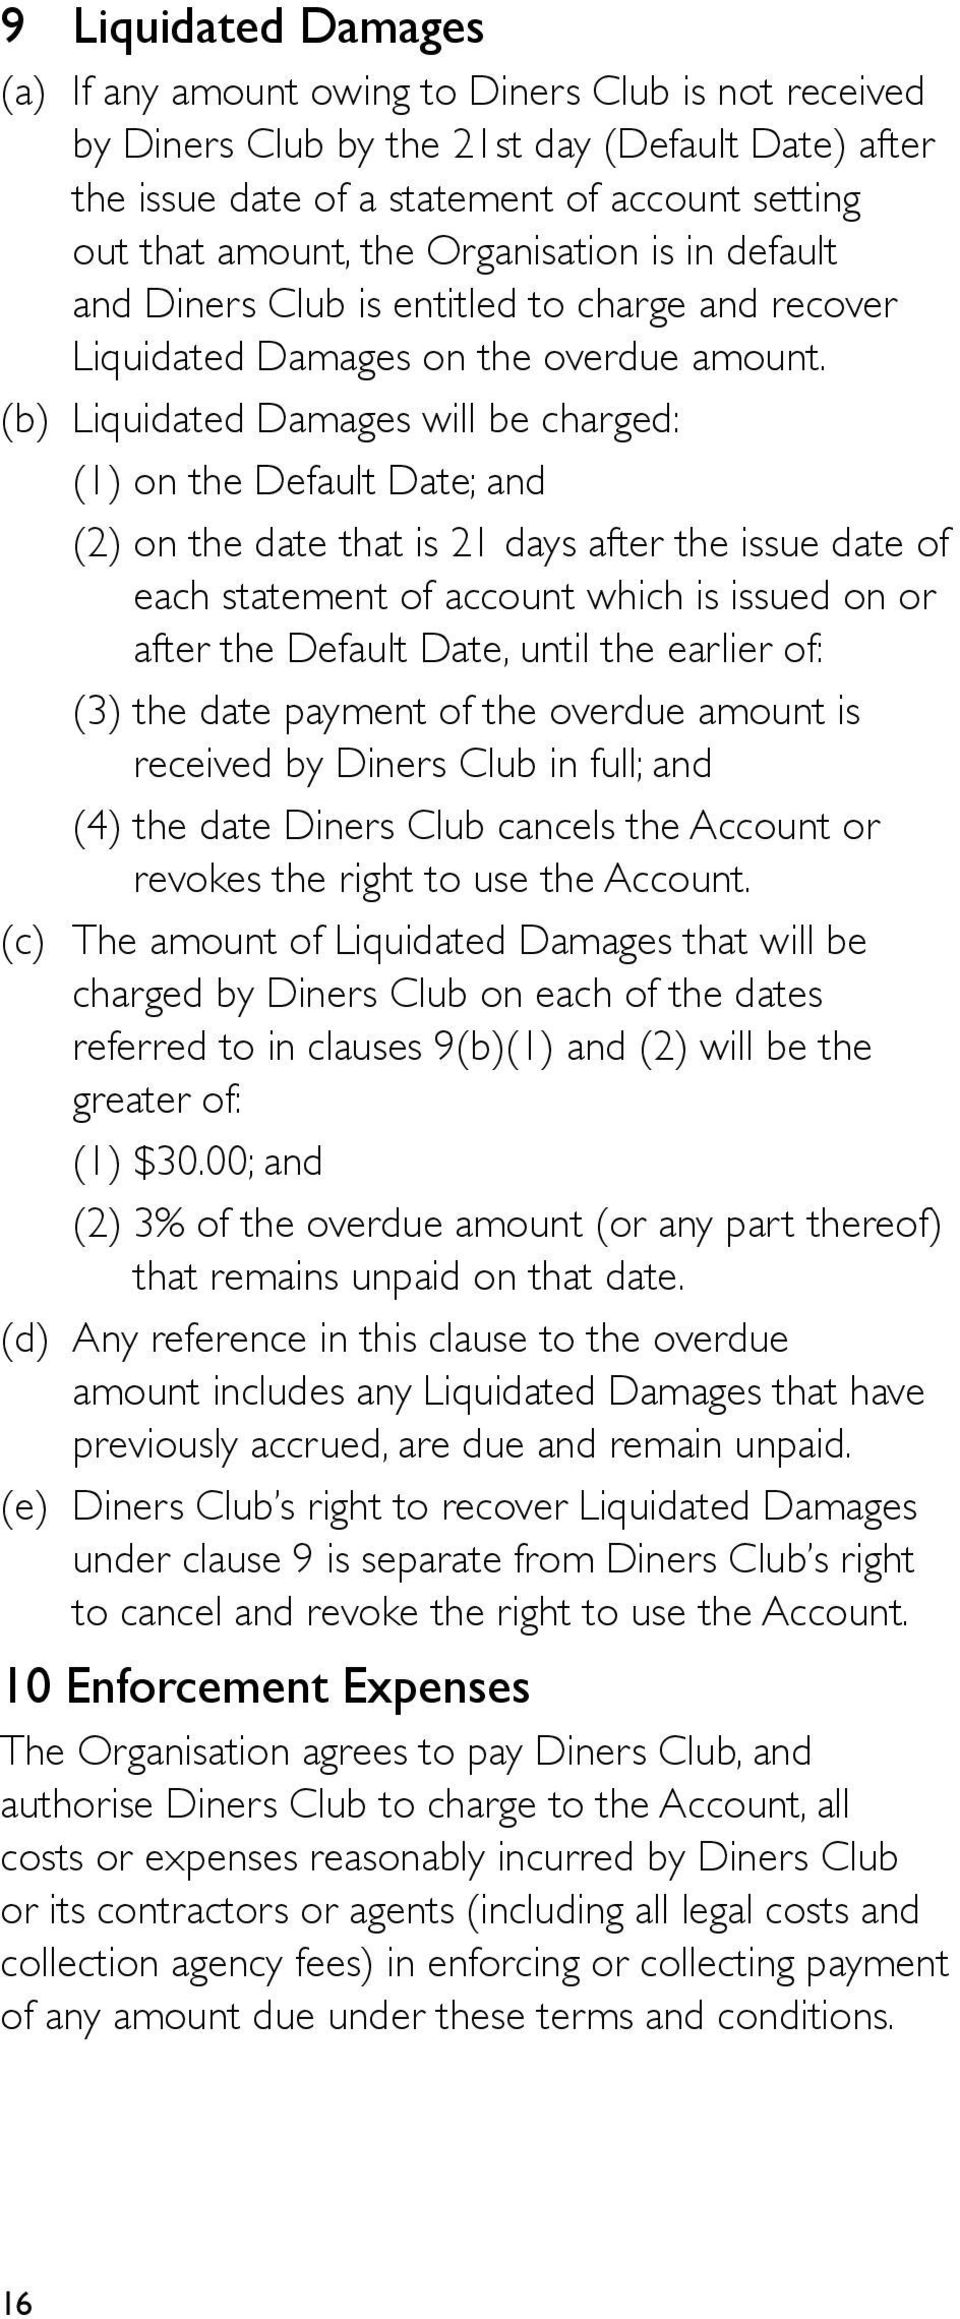 (b) Liquidated Damages will be charged: (1) on the Default Date; and (2) on the date that is 21 days after the issue date of each statement of account which is issued on or after the Default Date,